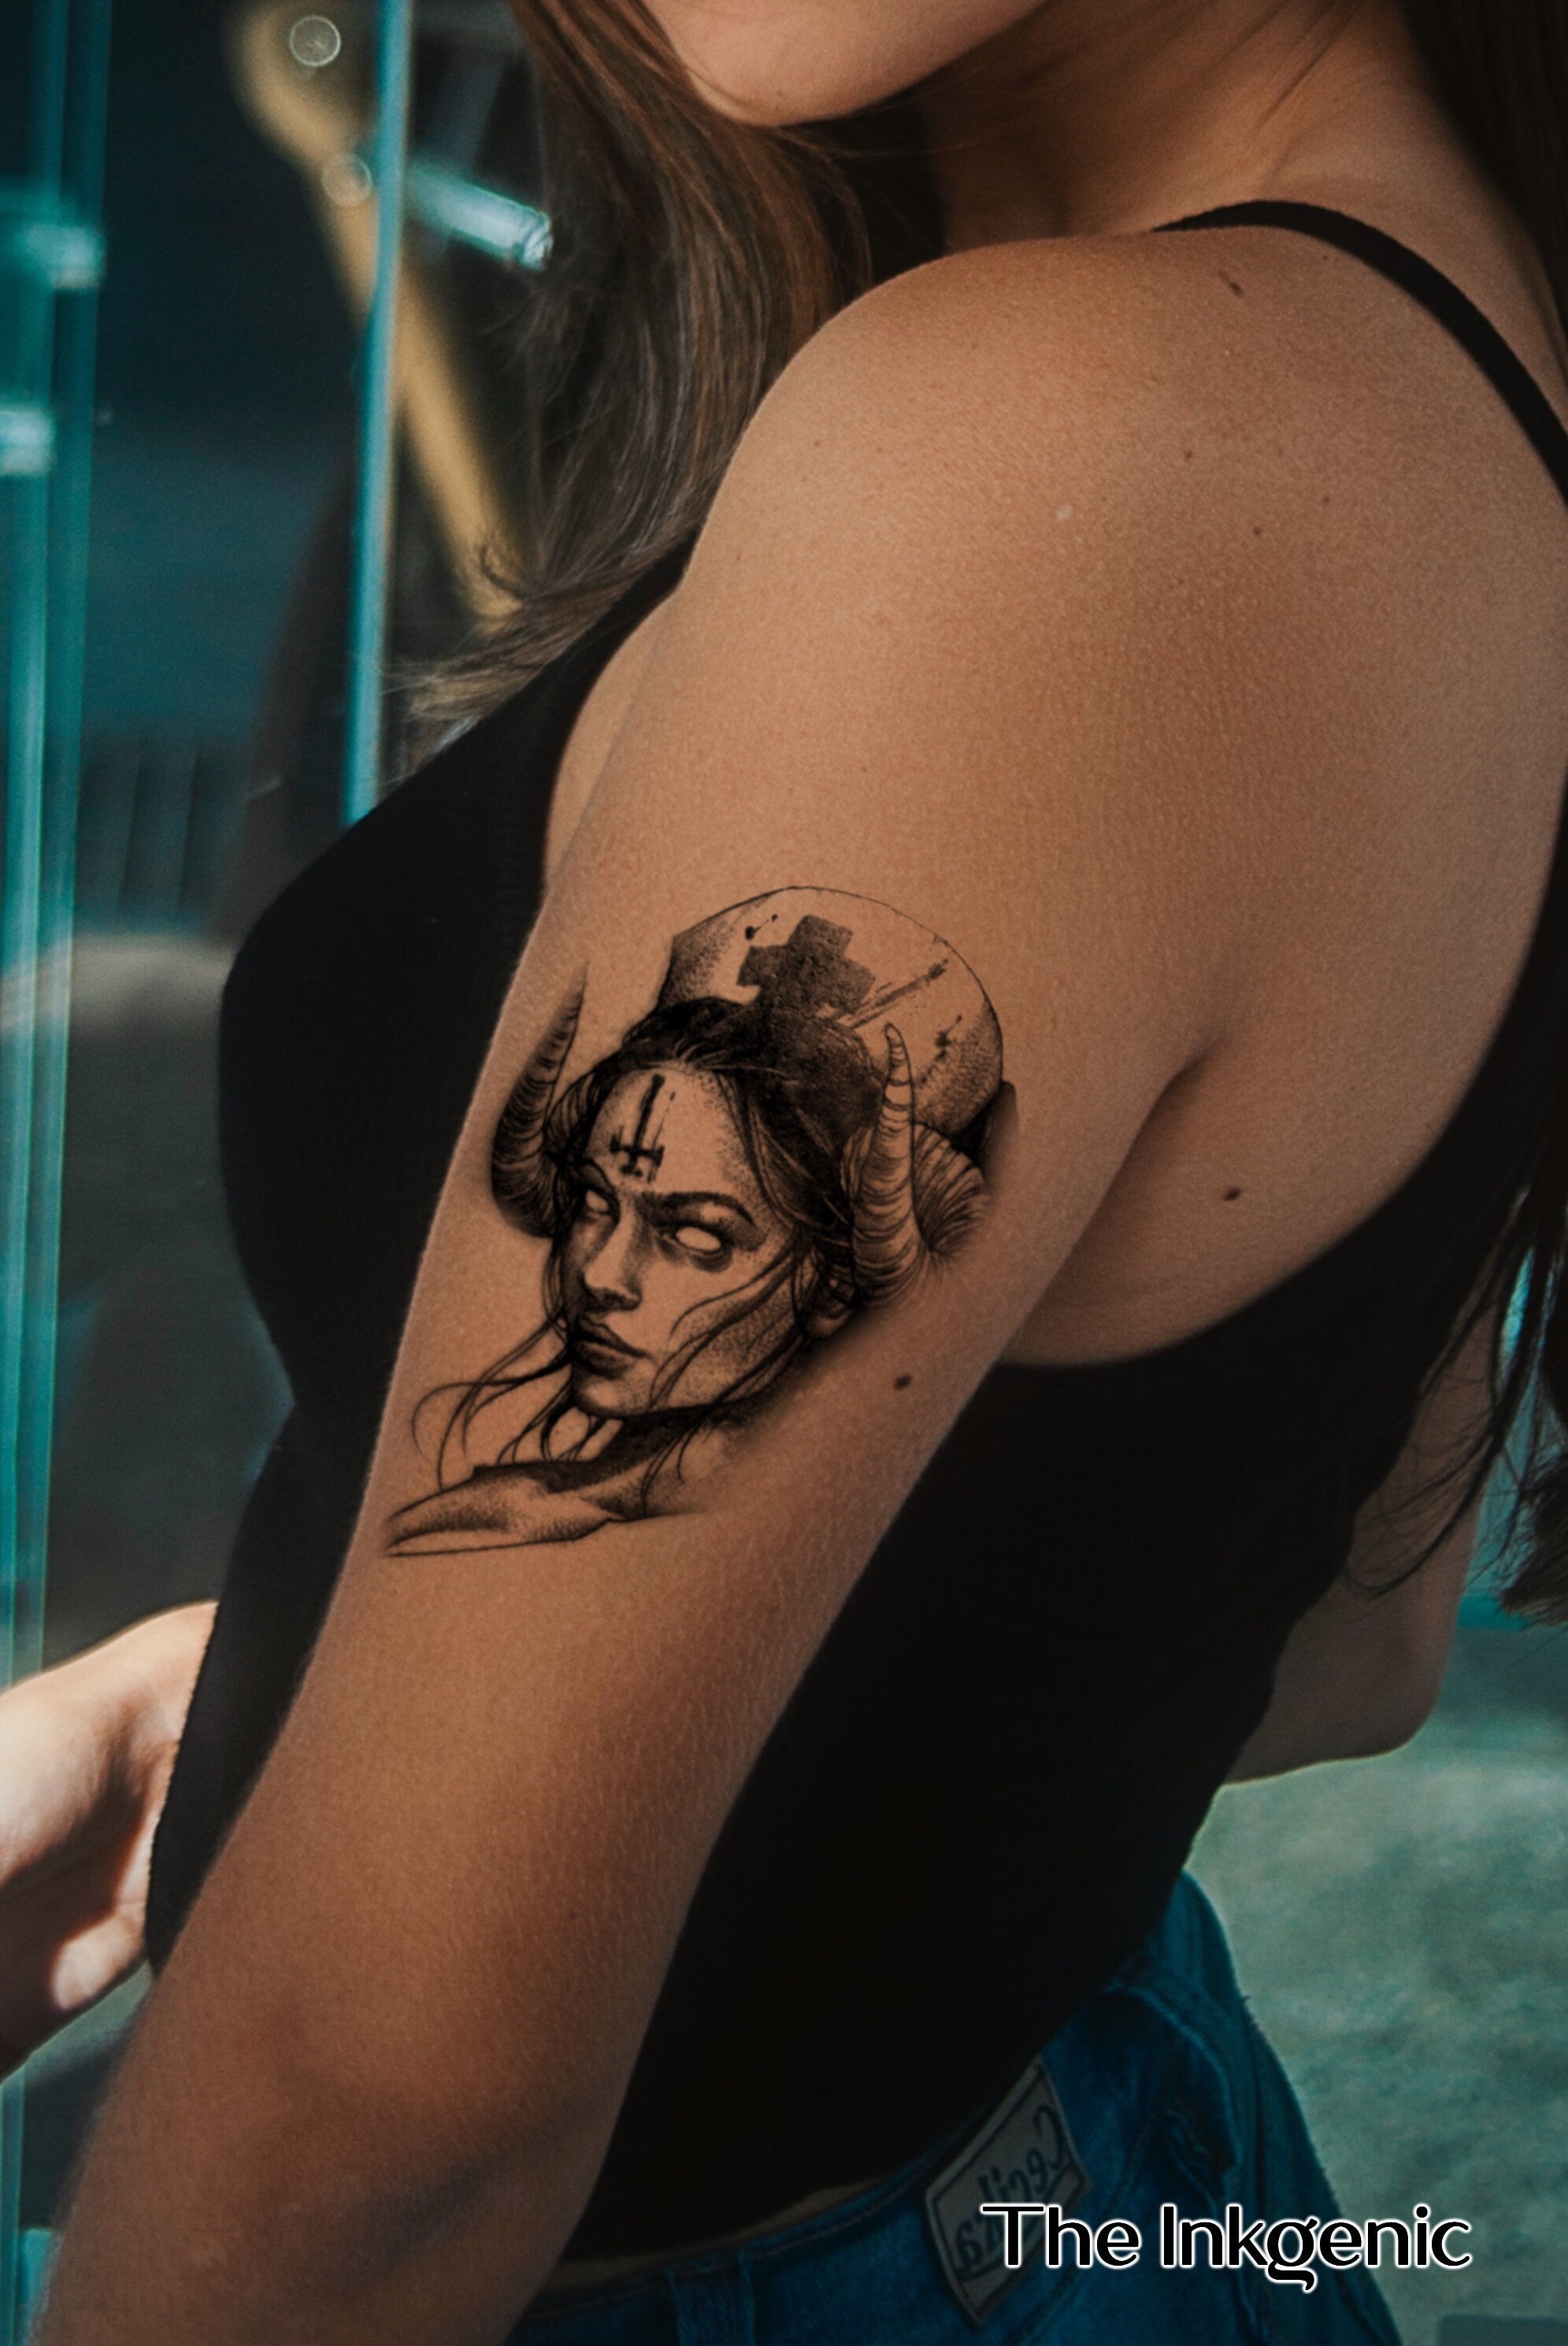 How to Design Your Own Tattoo: Inspiration & Design Tips